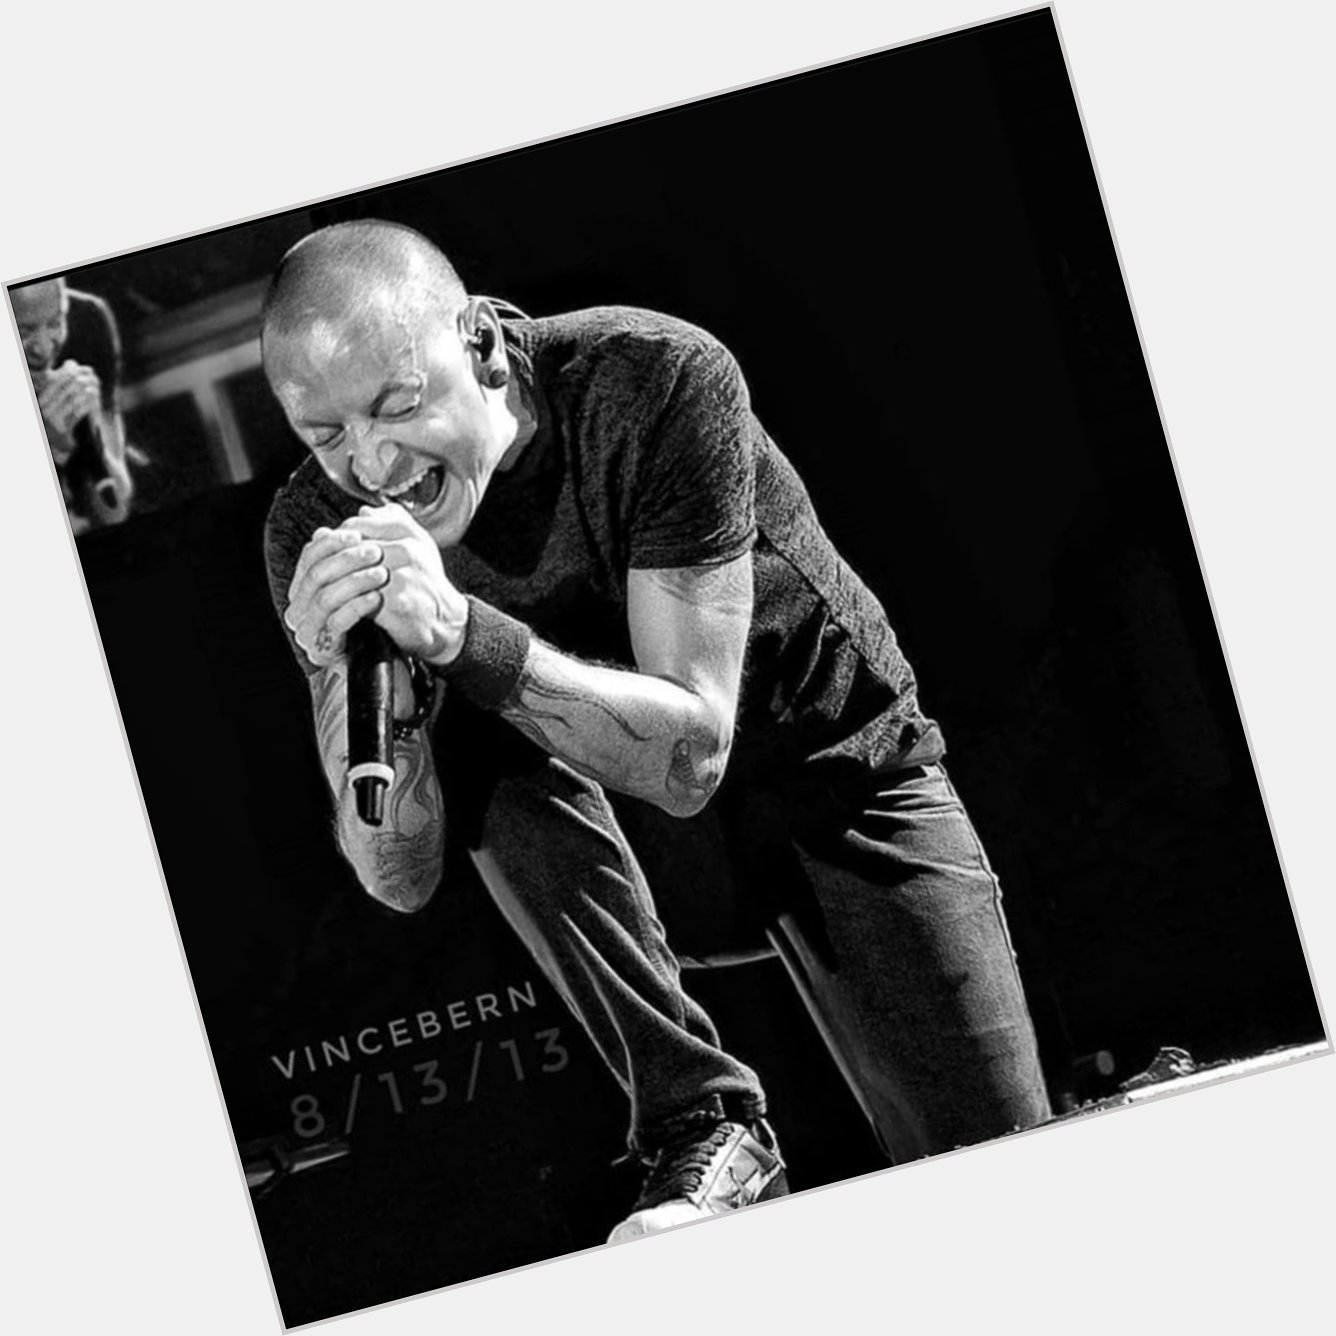 On this day in 1976, a rock legend was born! Happy Birthday Chester Bennington! 